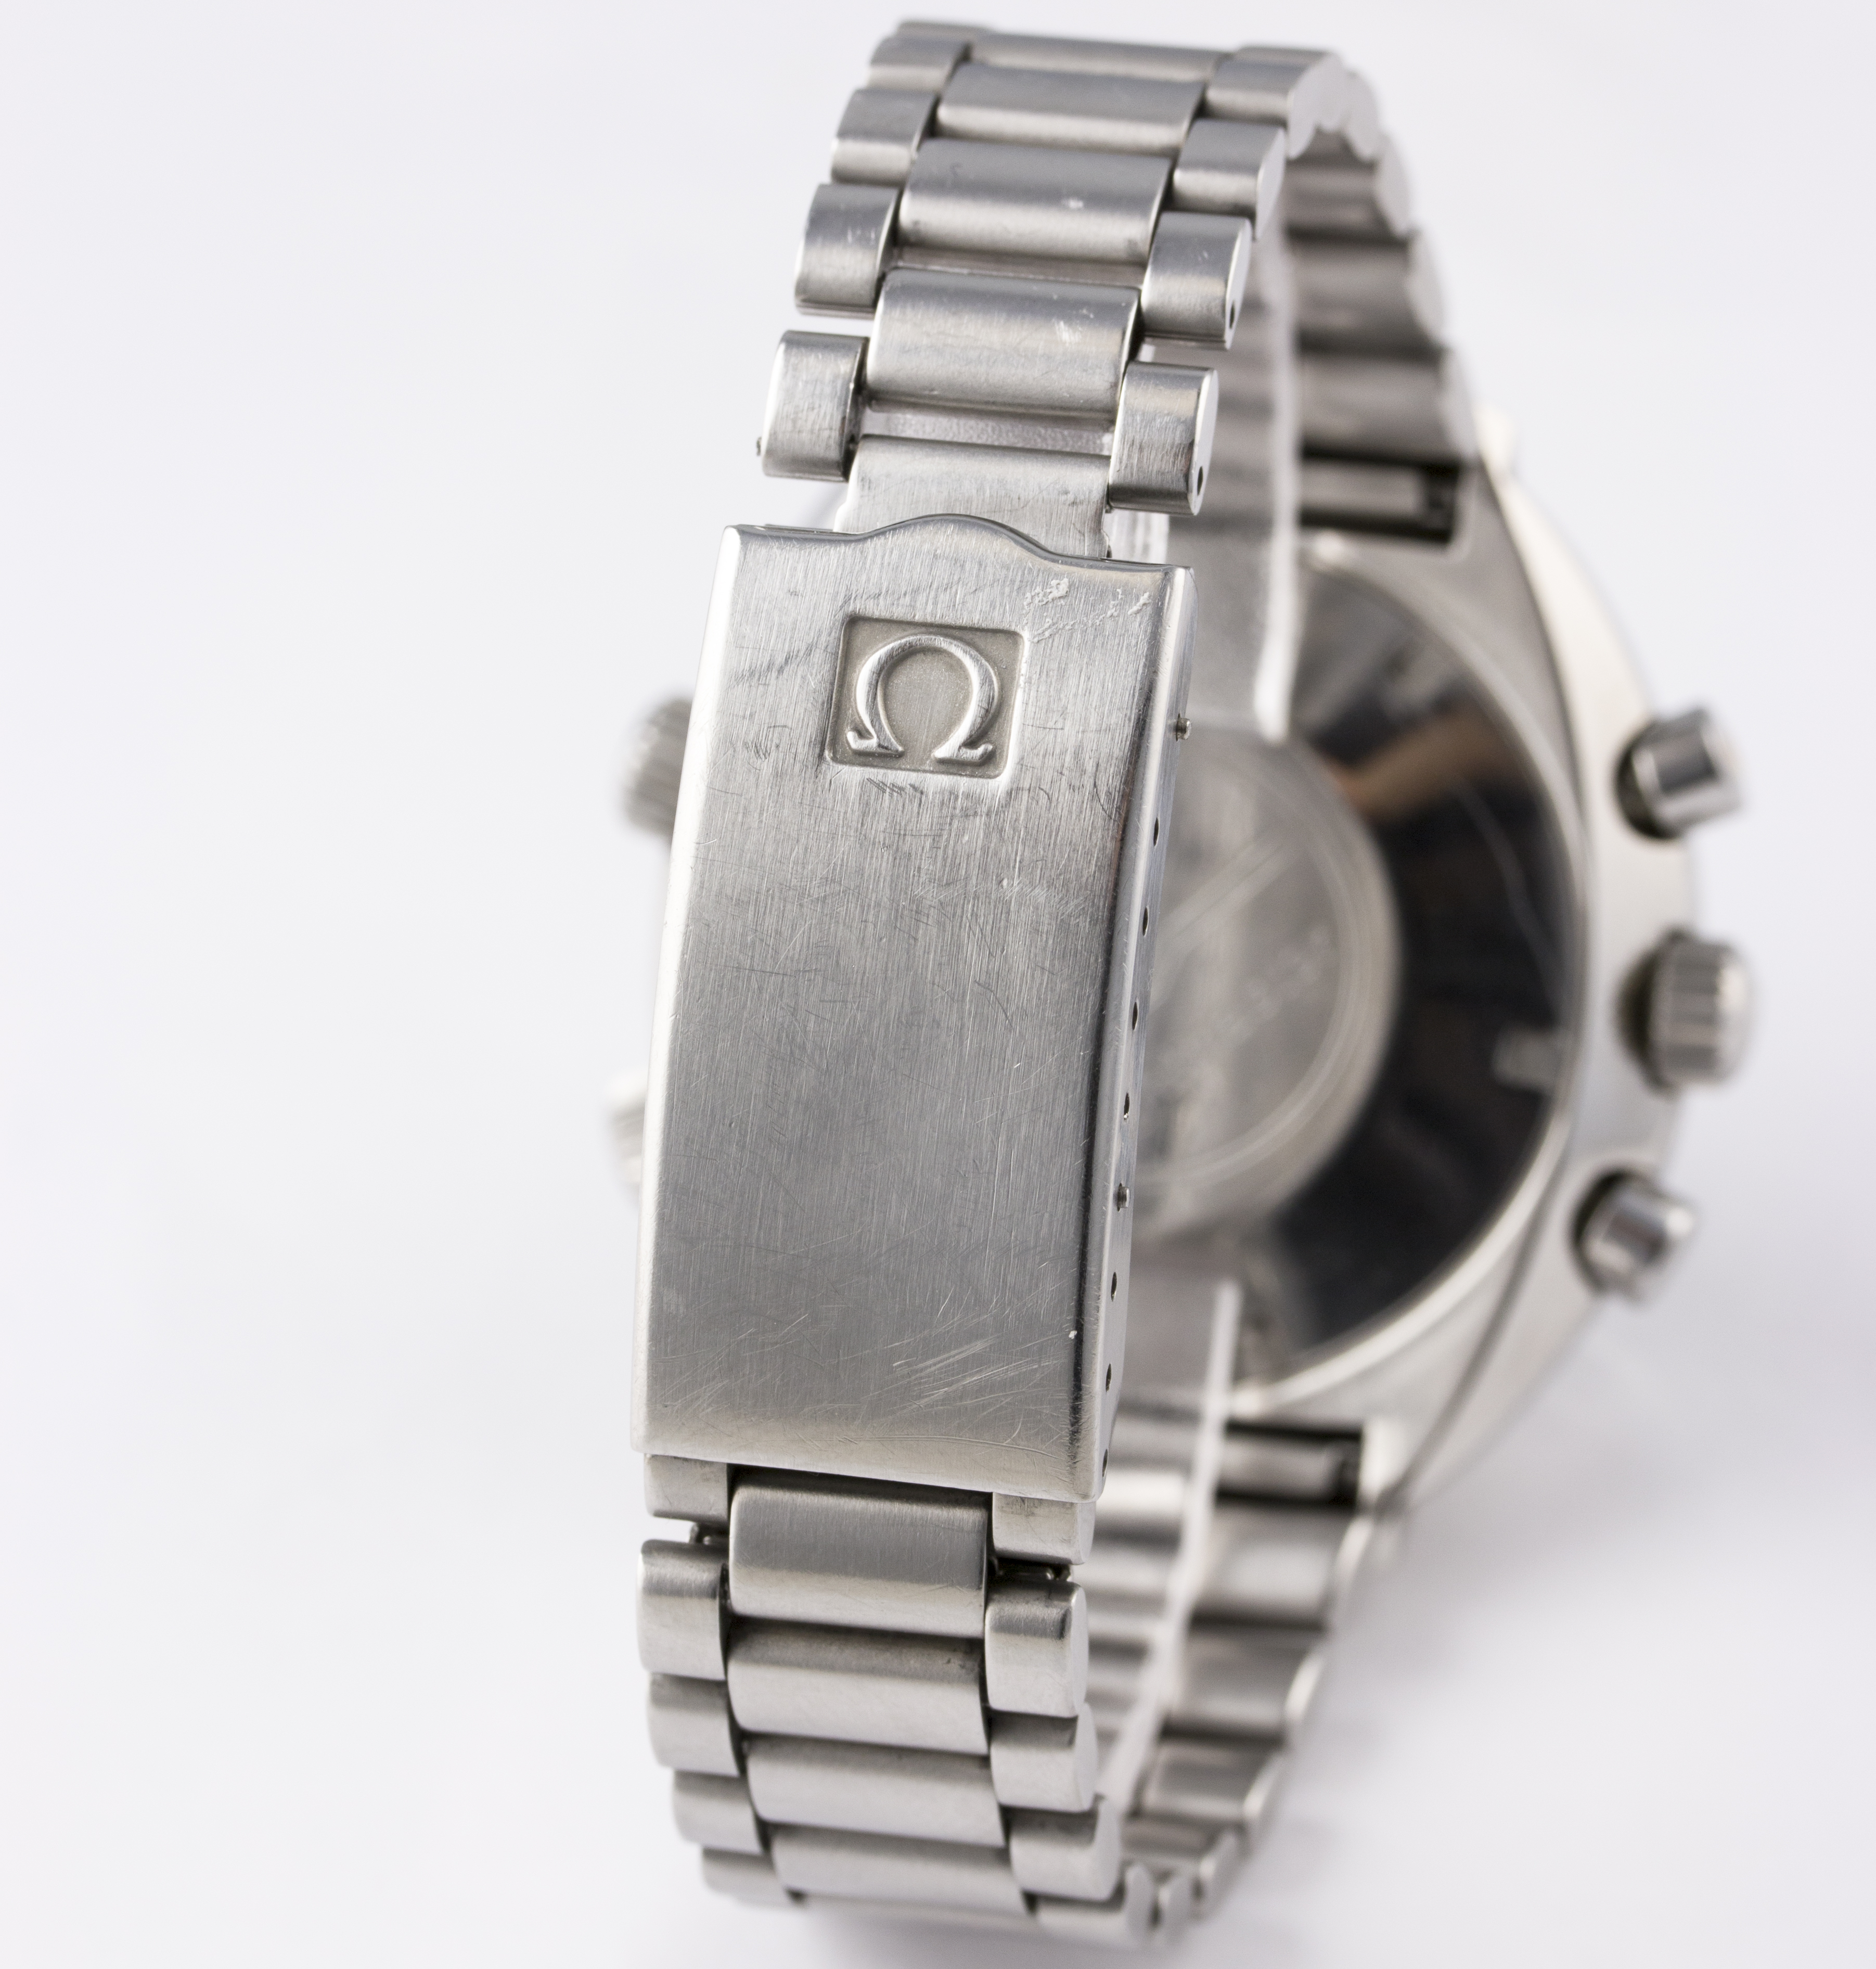 A RARE GENTLEMAN’S STAINLESS STEEL OMEGA FLIGHTMASTER CHRONOGRAPH BRACELET WATCH
CIRCA 1970, REF. 14 - Image 7 of 10